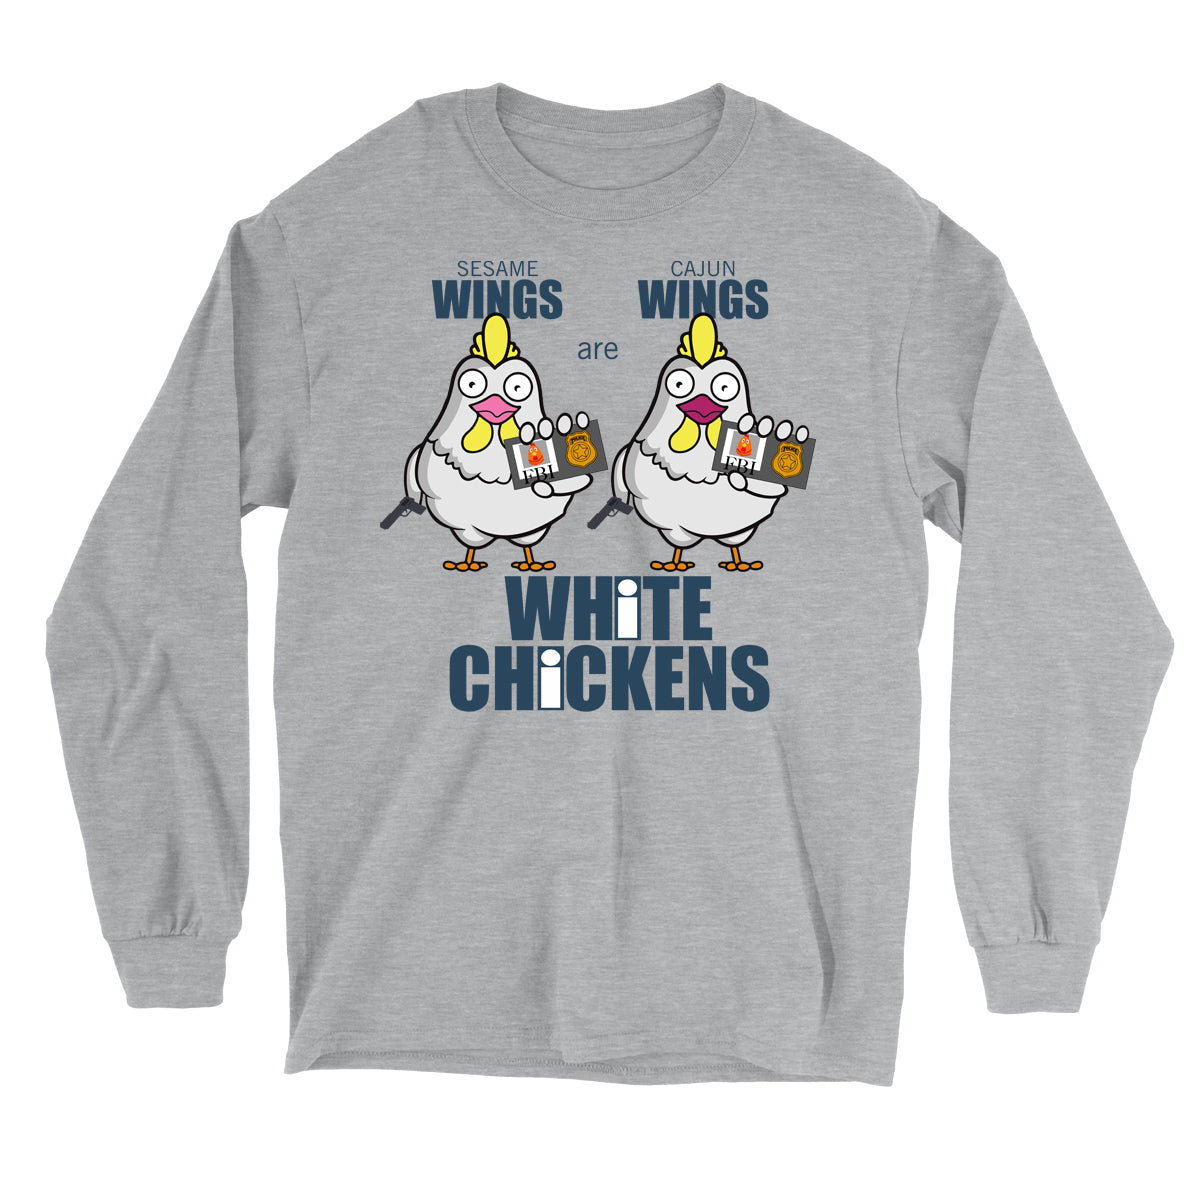 Movie The Food - White Chickens Longsleeve T-Shirt - Sport Grey